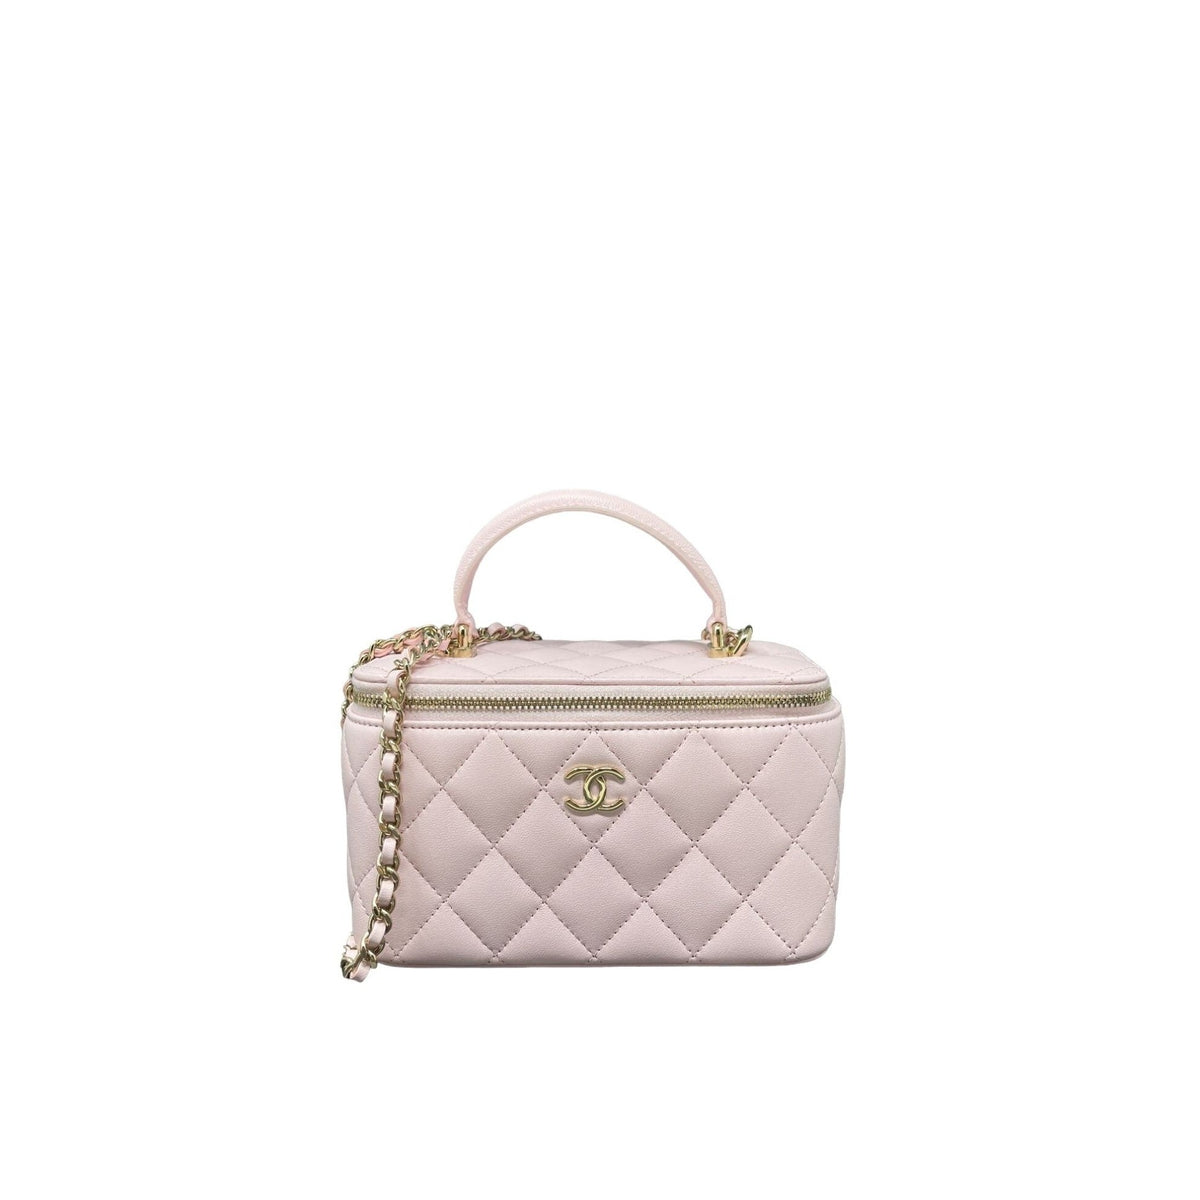 Chanel Quilted Small Handle With Care Vanity Case With Chain Green Cav –  Coco Approved Studio